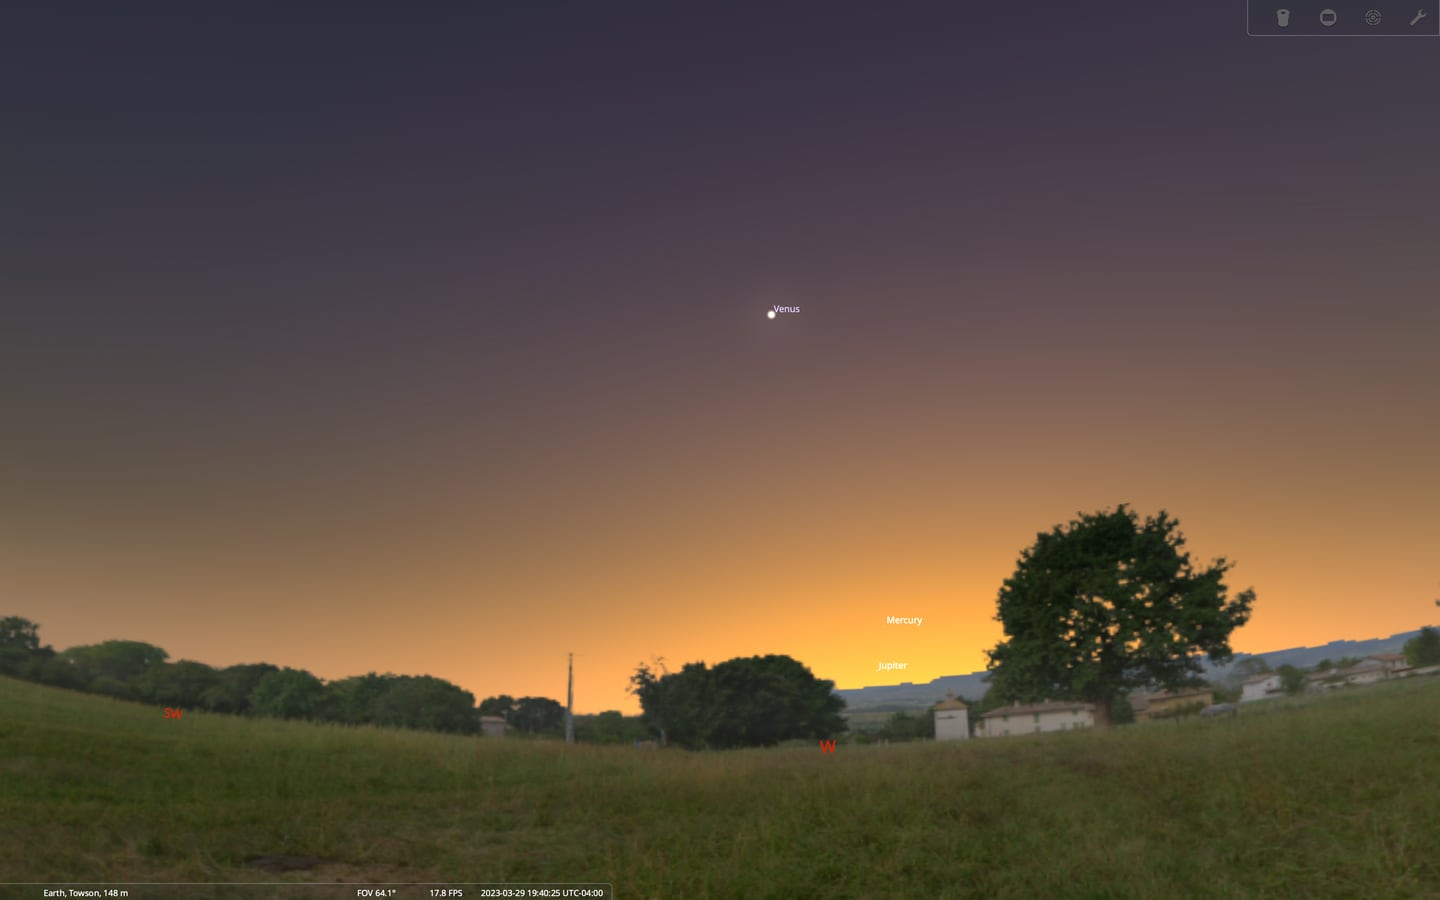 This rendering shows Jupiter and Mercury, which will be low on the western horizon immediately following sunset as seen from Baltimore. Venus, the brightest object is higher above the horizon